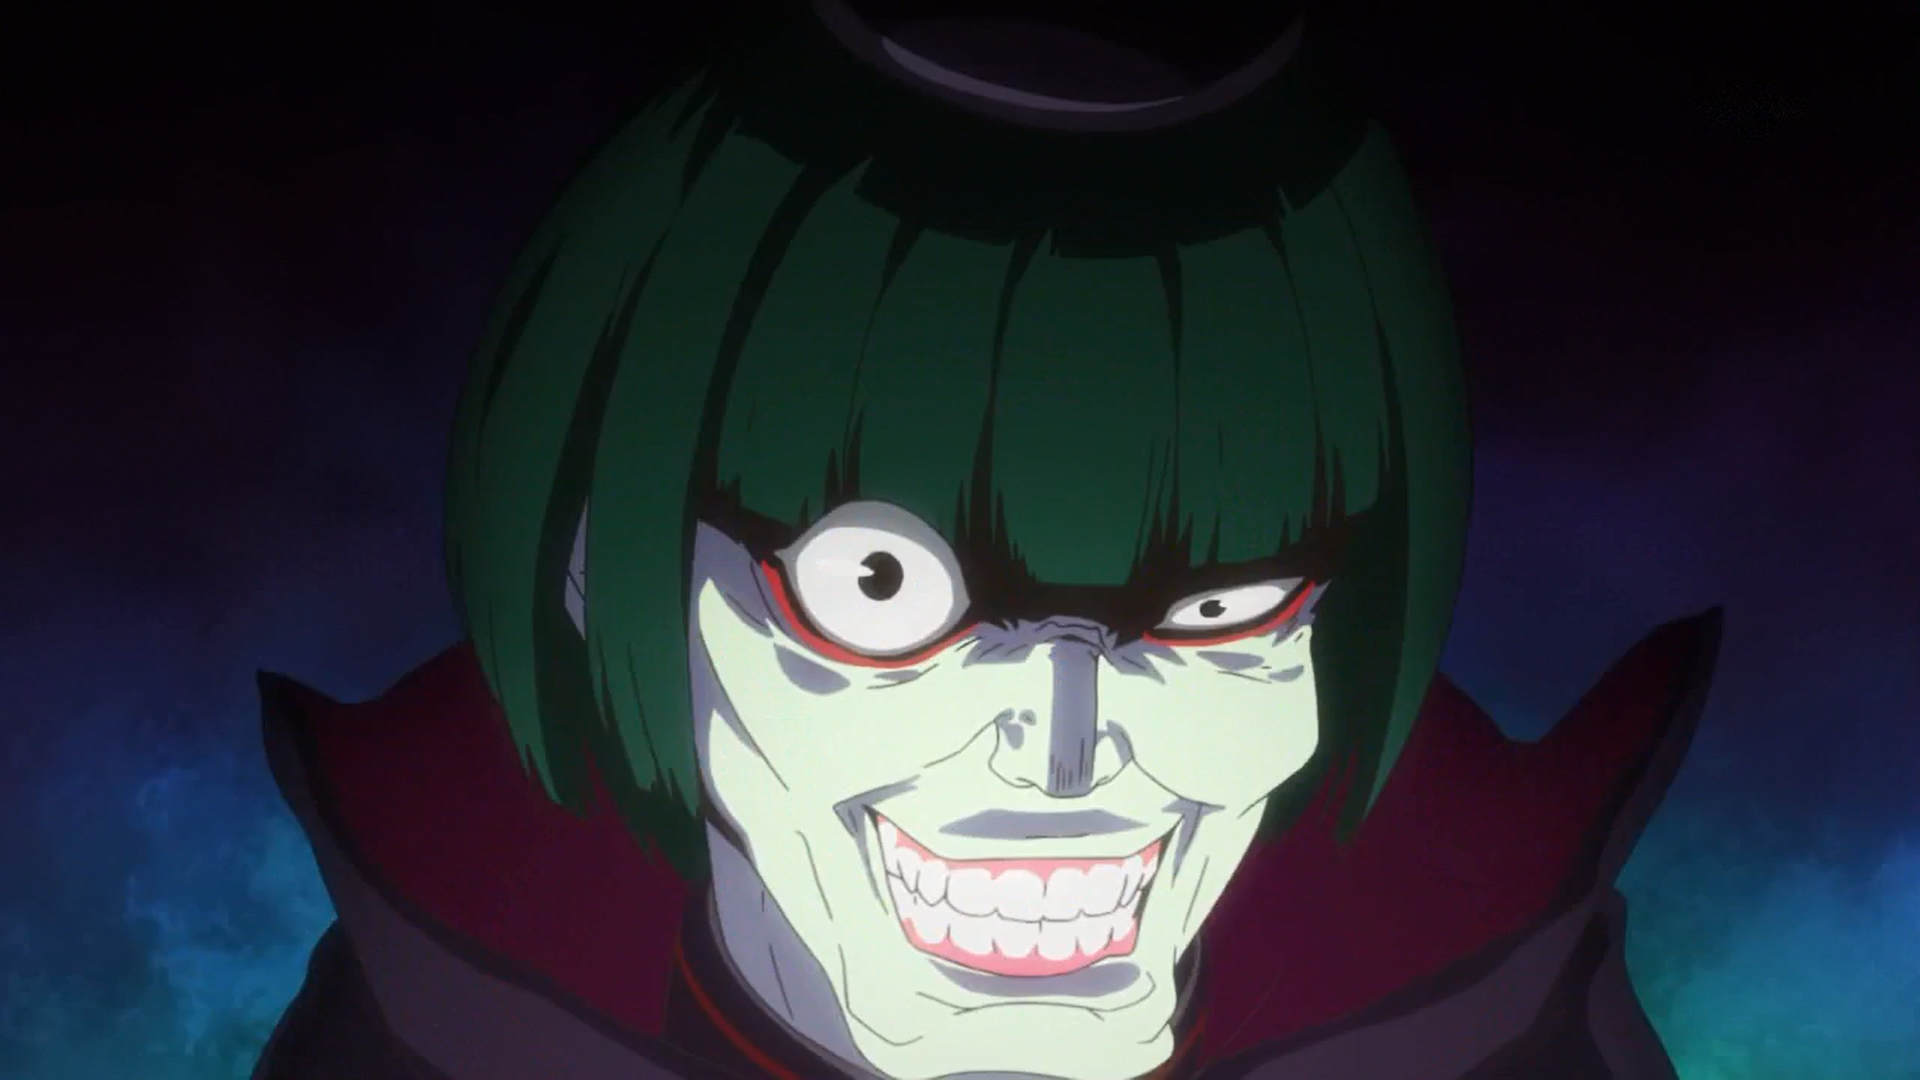 The Most Lovable Villains in Anime and Manga according to